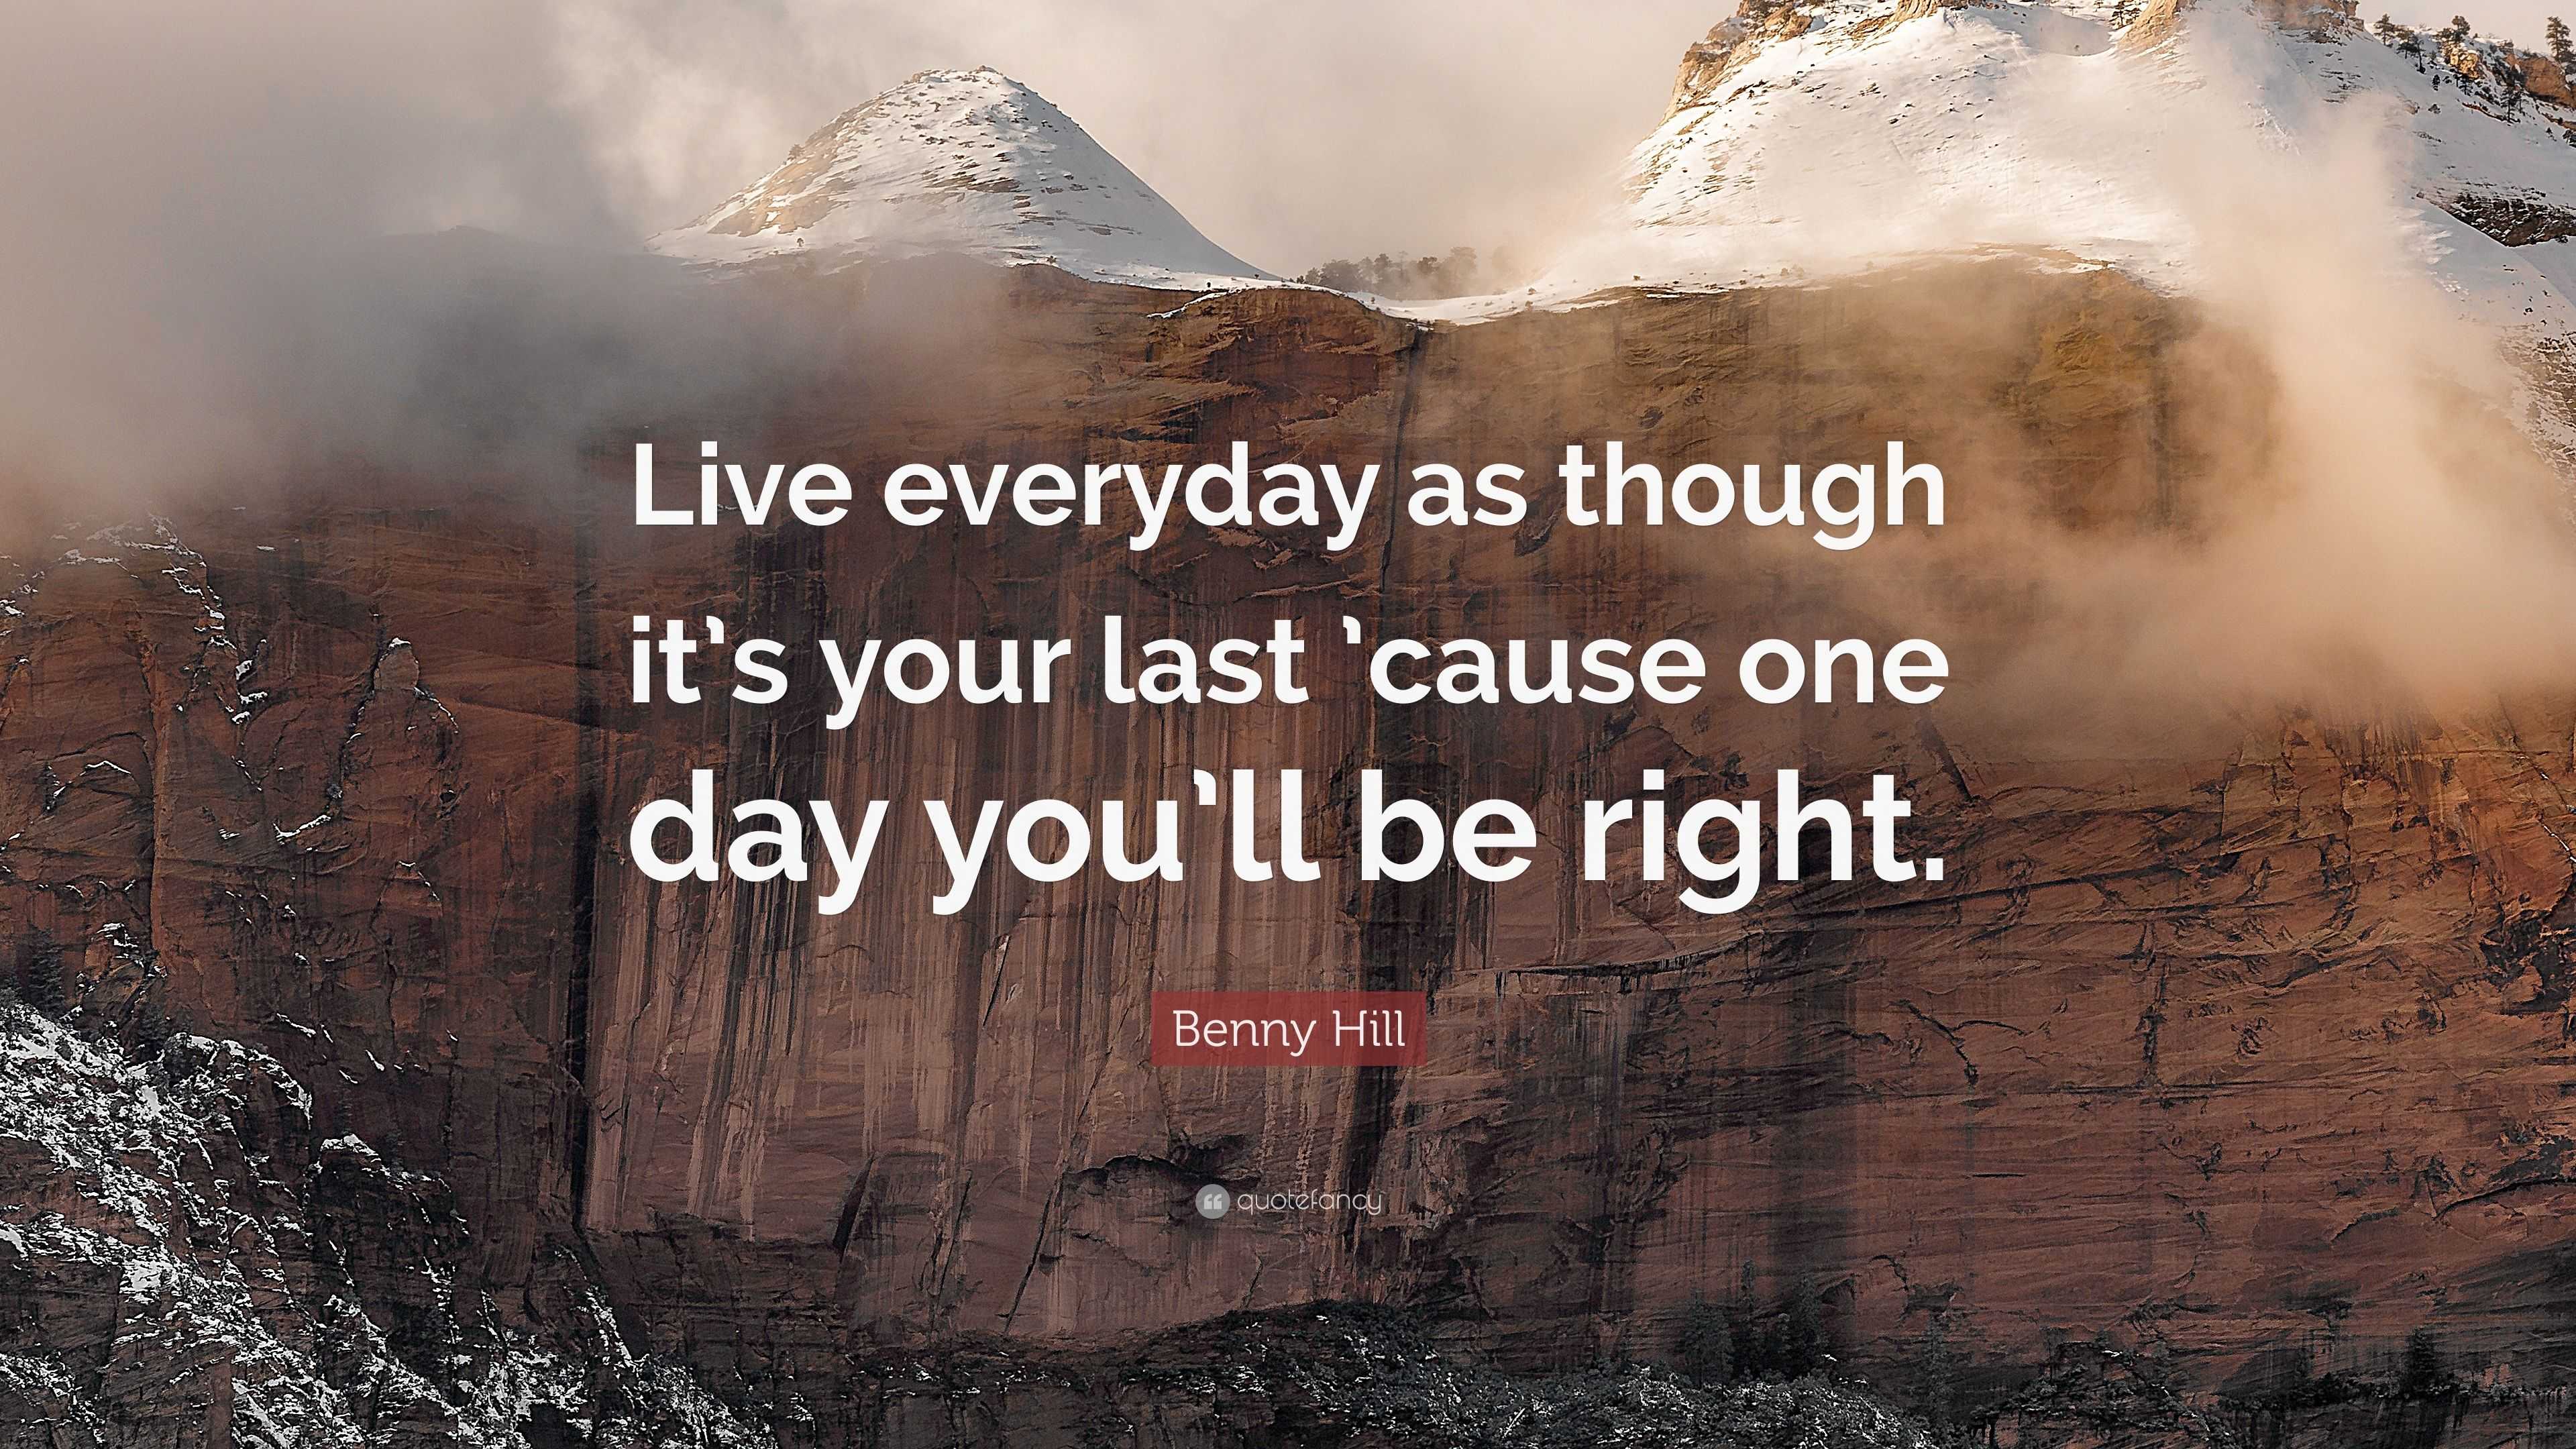 Benny Hill Quote: “Live everyday as though it’s your last ’cause one